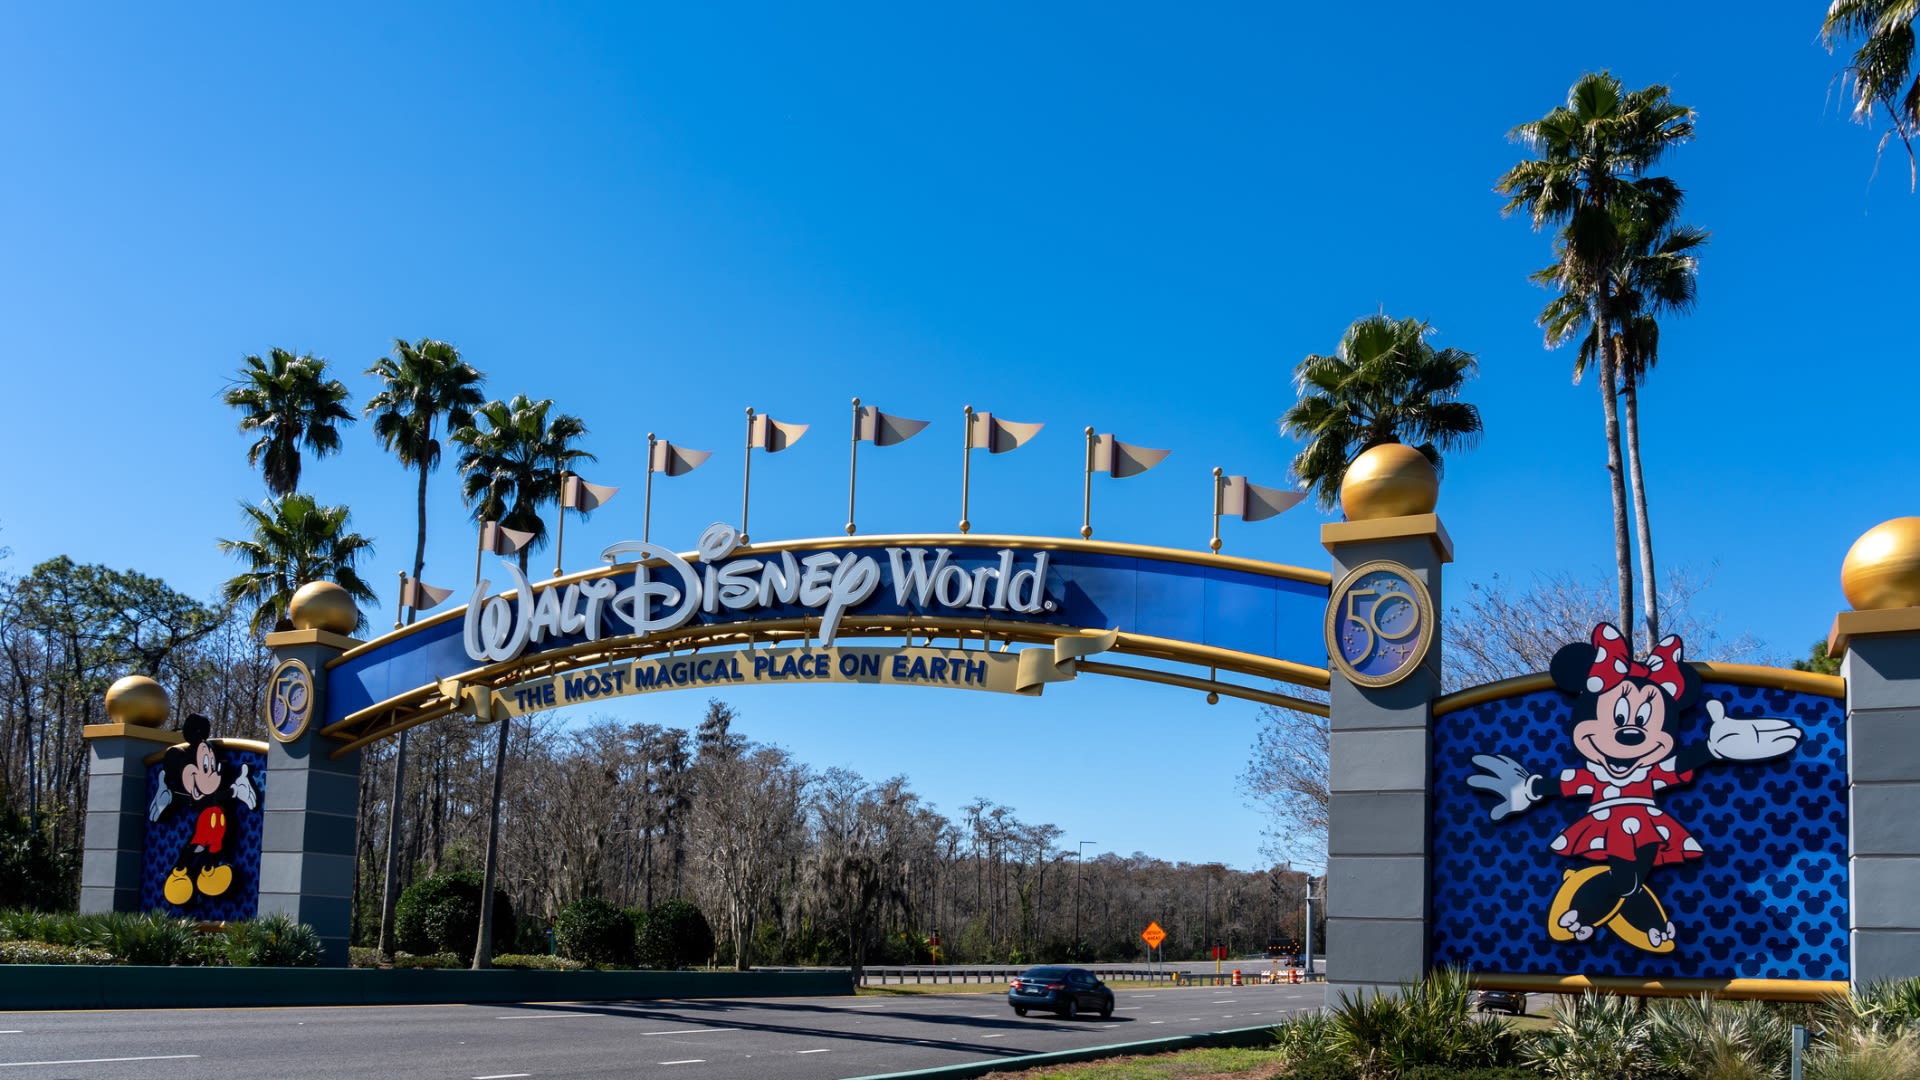 Here’s How Much It Cost To Go To Disney World the Year You Were Born